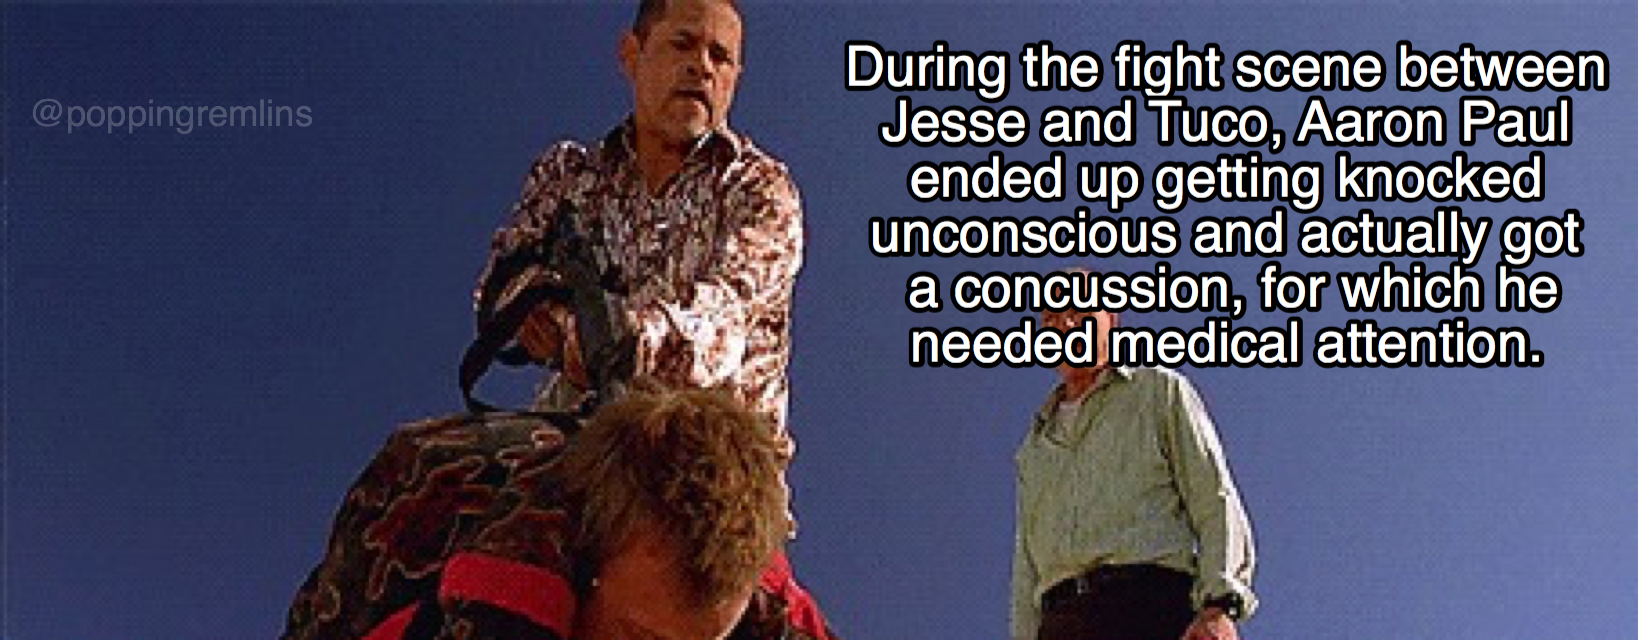 human - During the fight scene between Jesse and Tuco, Aaron Paul ended up getting knocked unconscious and actually got a concussion, for which he needed medical attention.